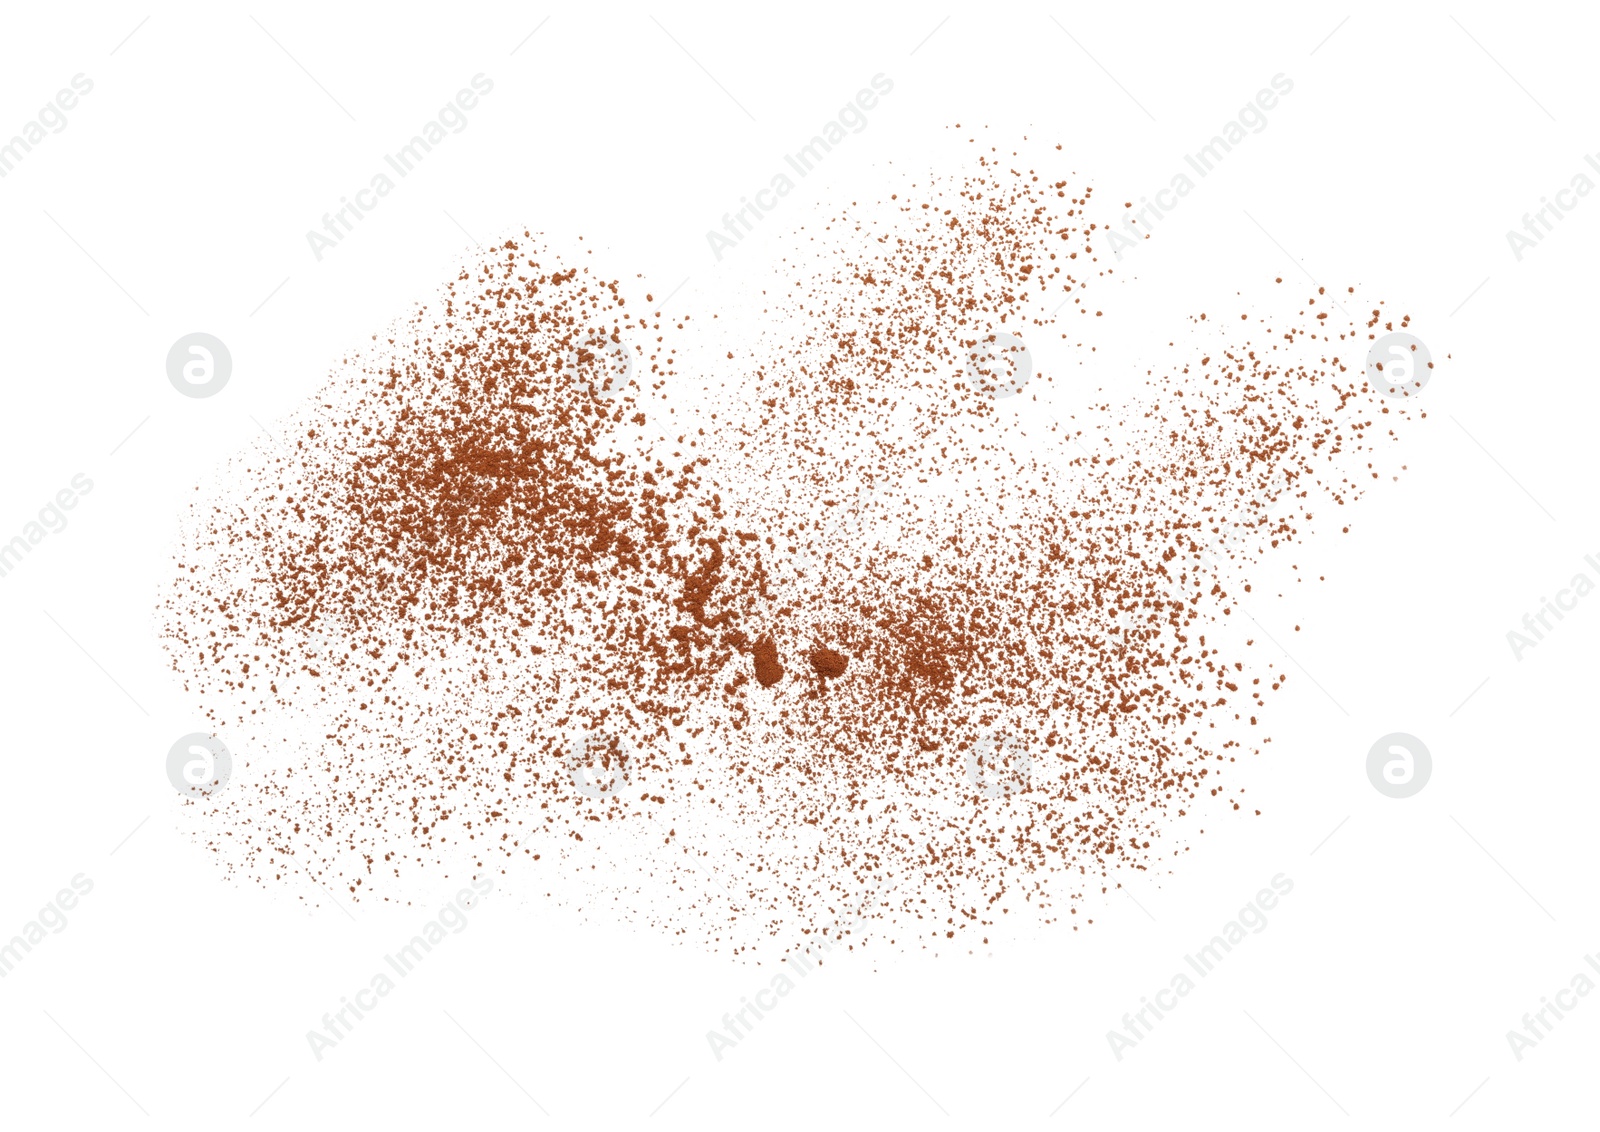 Photo of Brown cocoa powder on white background, top view